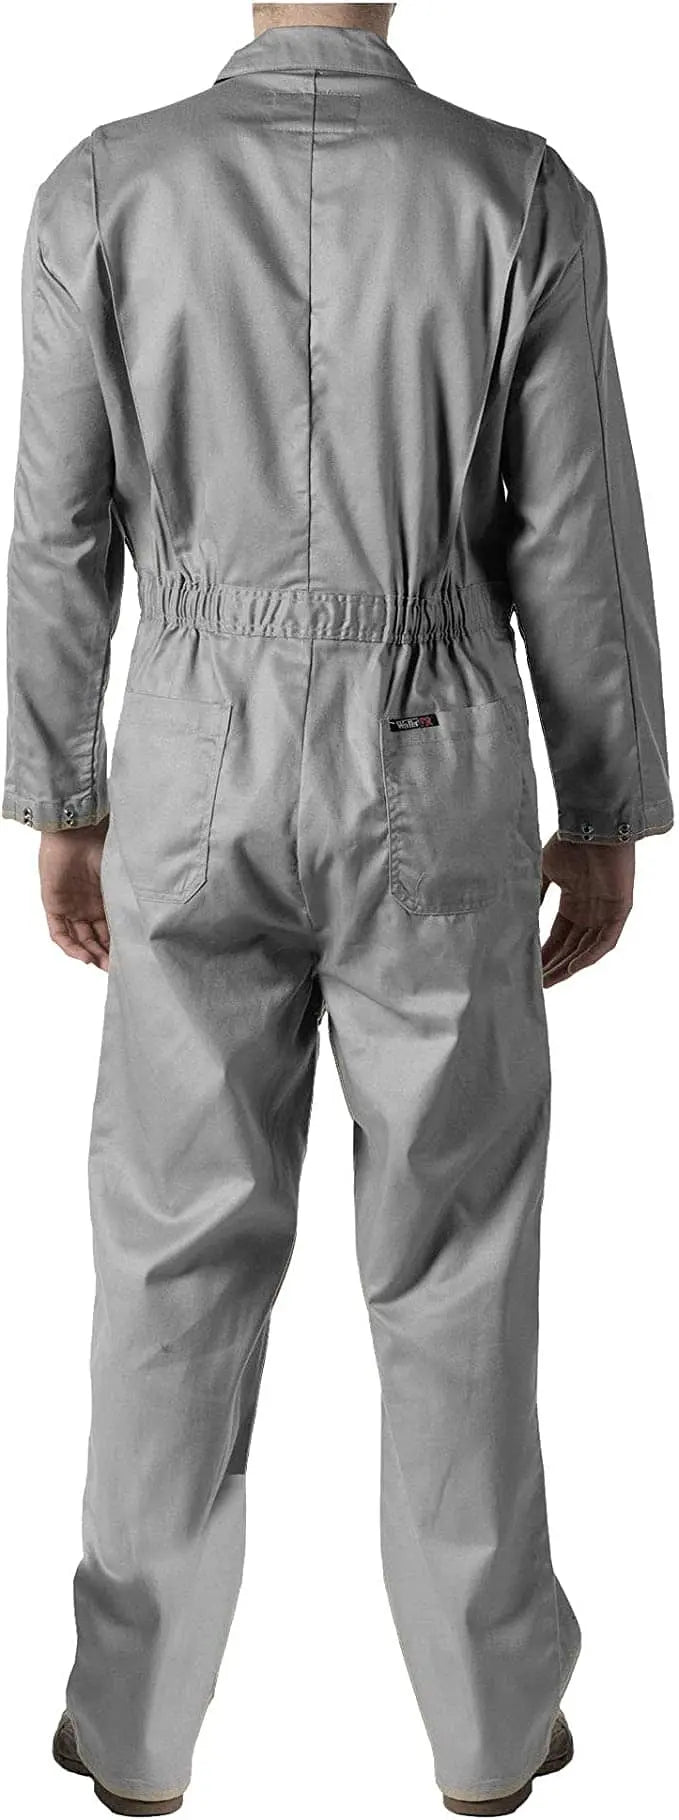 WALLS - FR GREY 2.0 Contractor Coveralls (DISCONTINUED) - Becker Safety and Supply